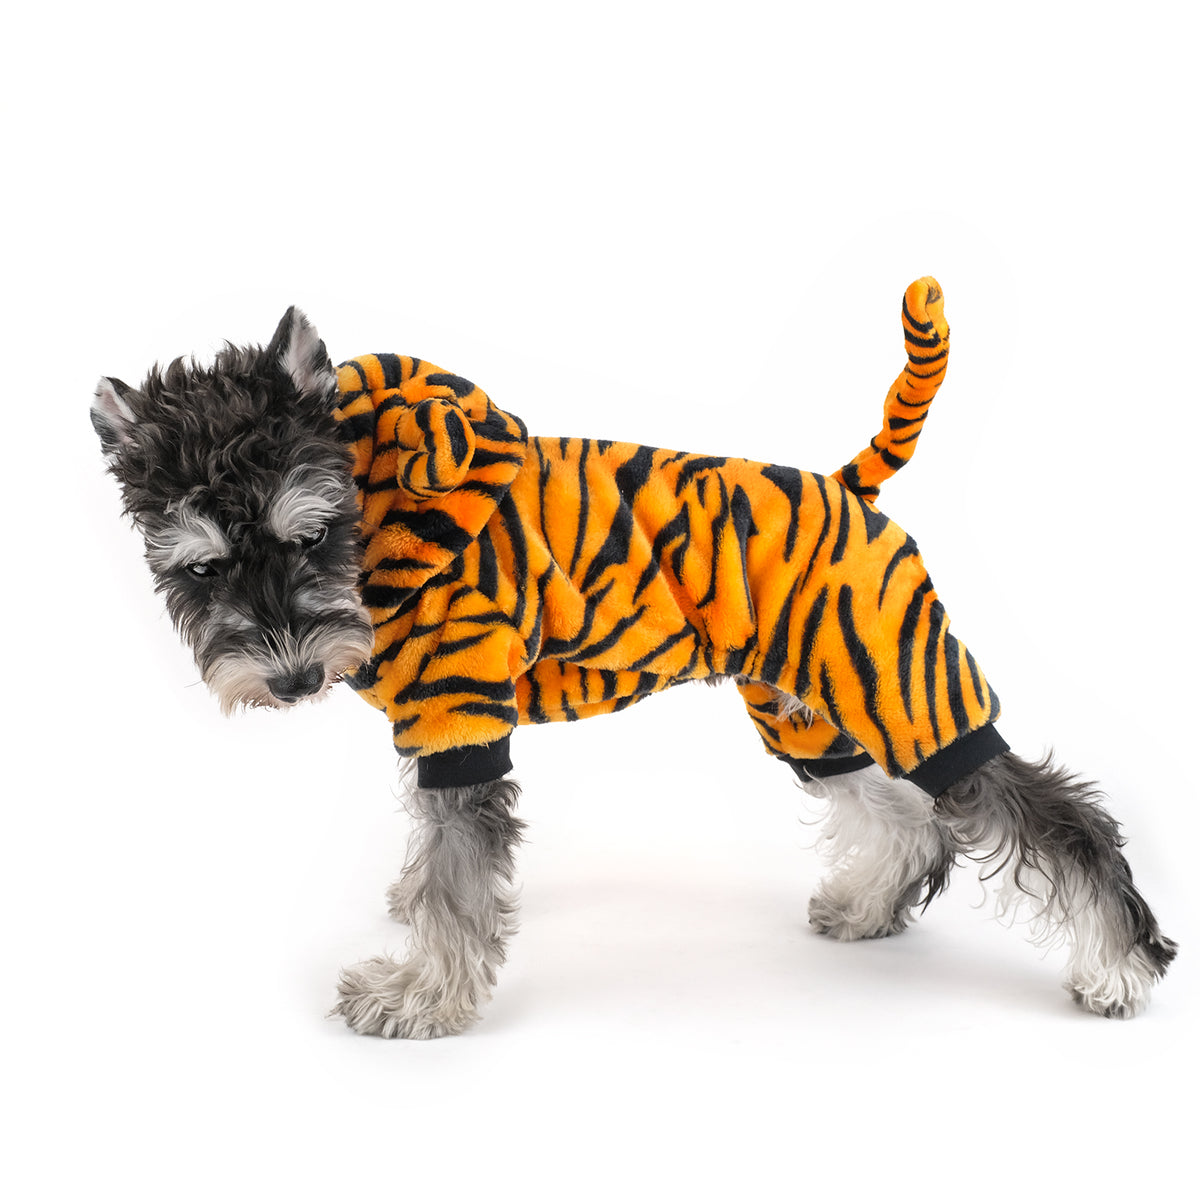 Innopet Tiger Costume - Cosplay Costume for Small Dogs and Cats - Yellow and Black Velvet Pet Clothes - Warm Apparel Winter Pet Tiger Costume - Dog Outfits for Christmas, Cosplay and Birthday Parties…